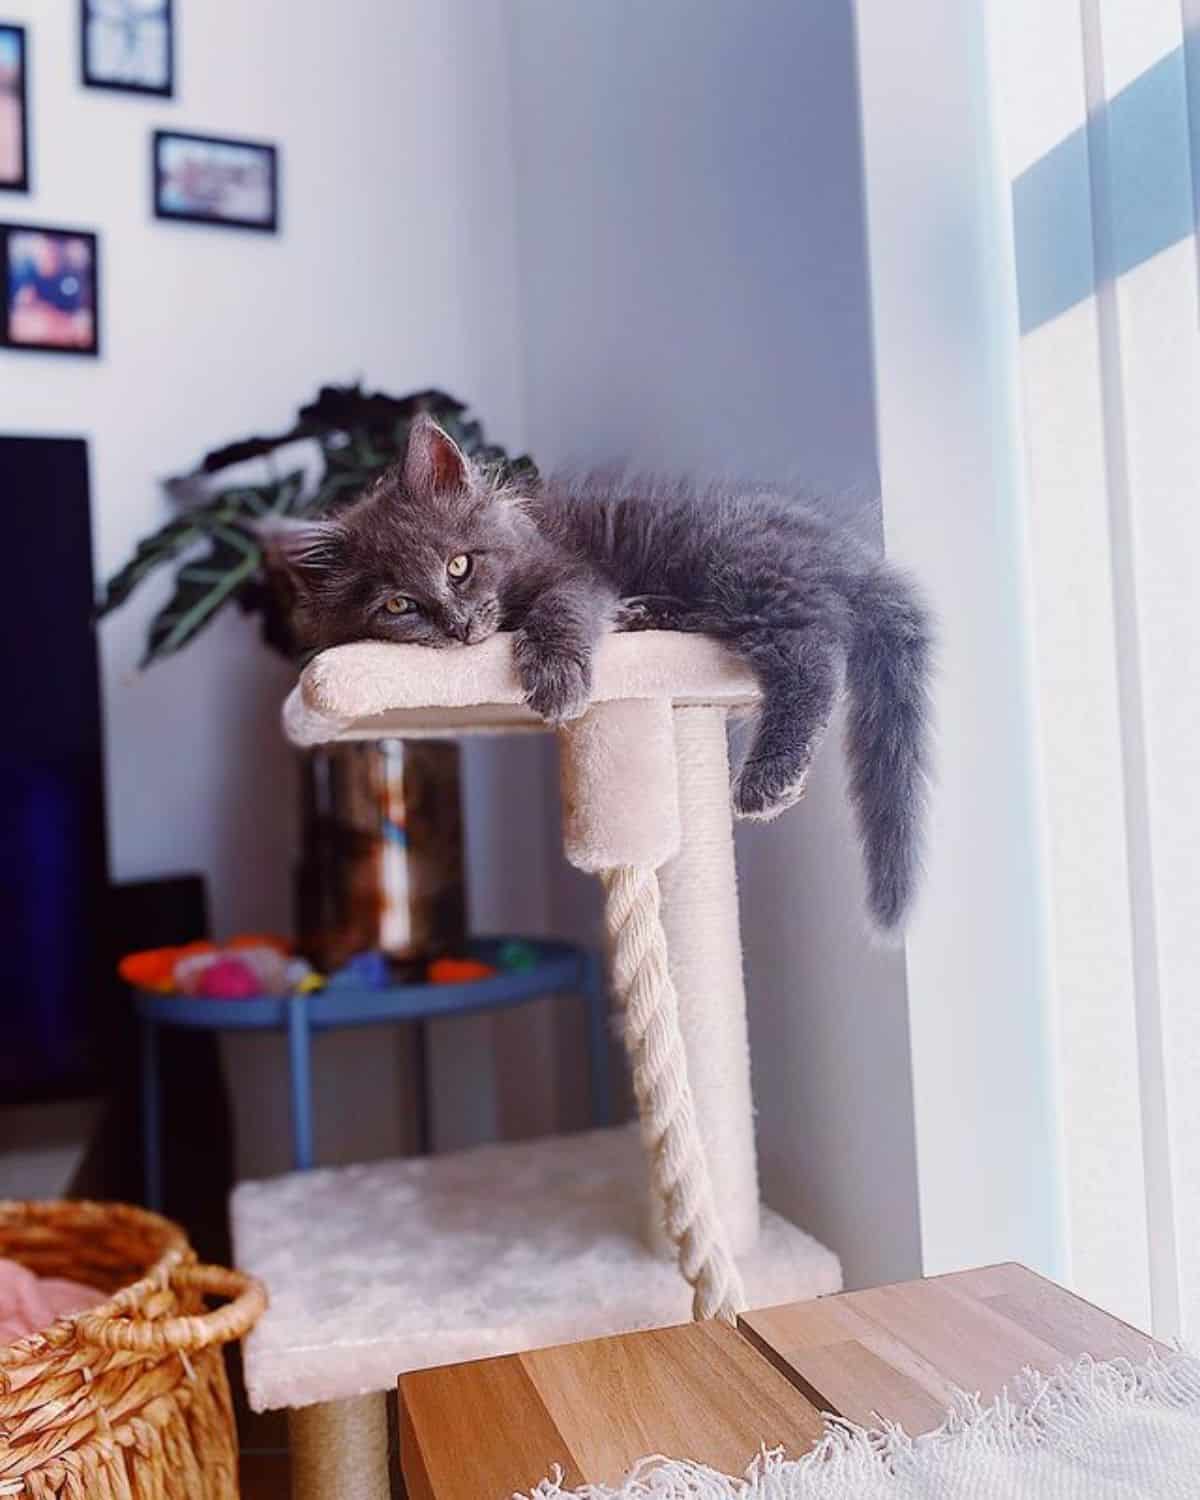 A cute gray maine coon kitten lying on a cat tree.